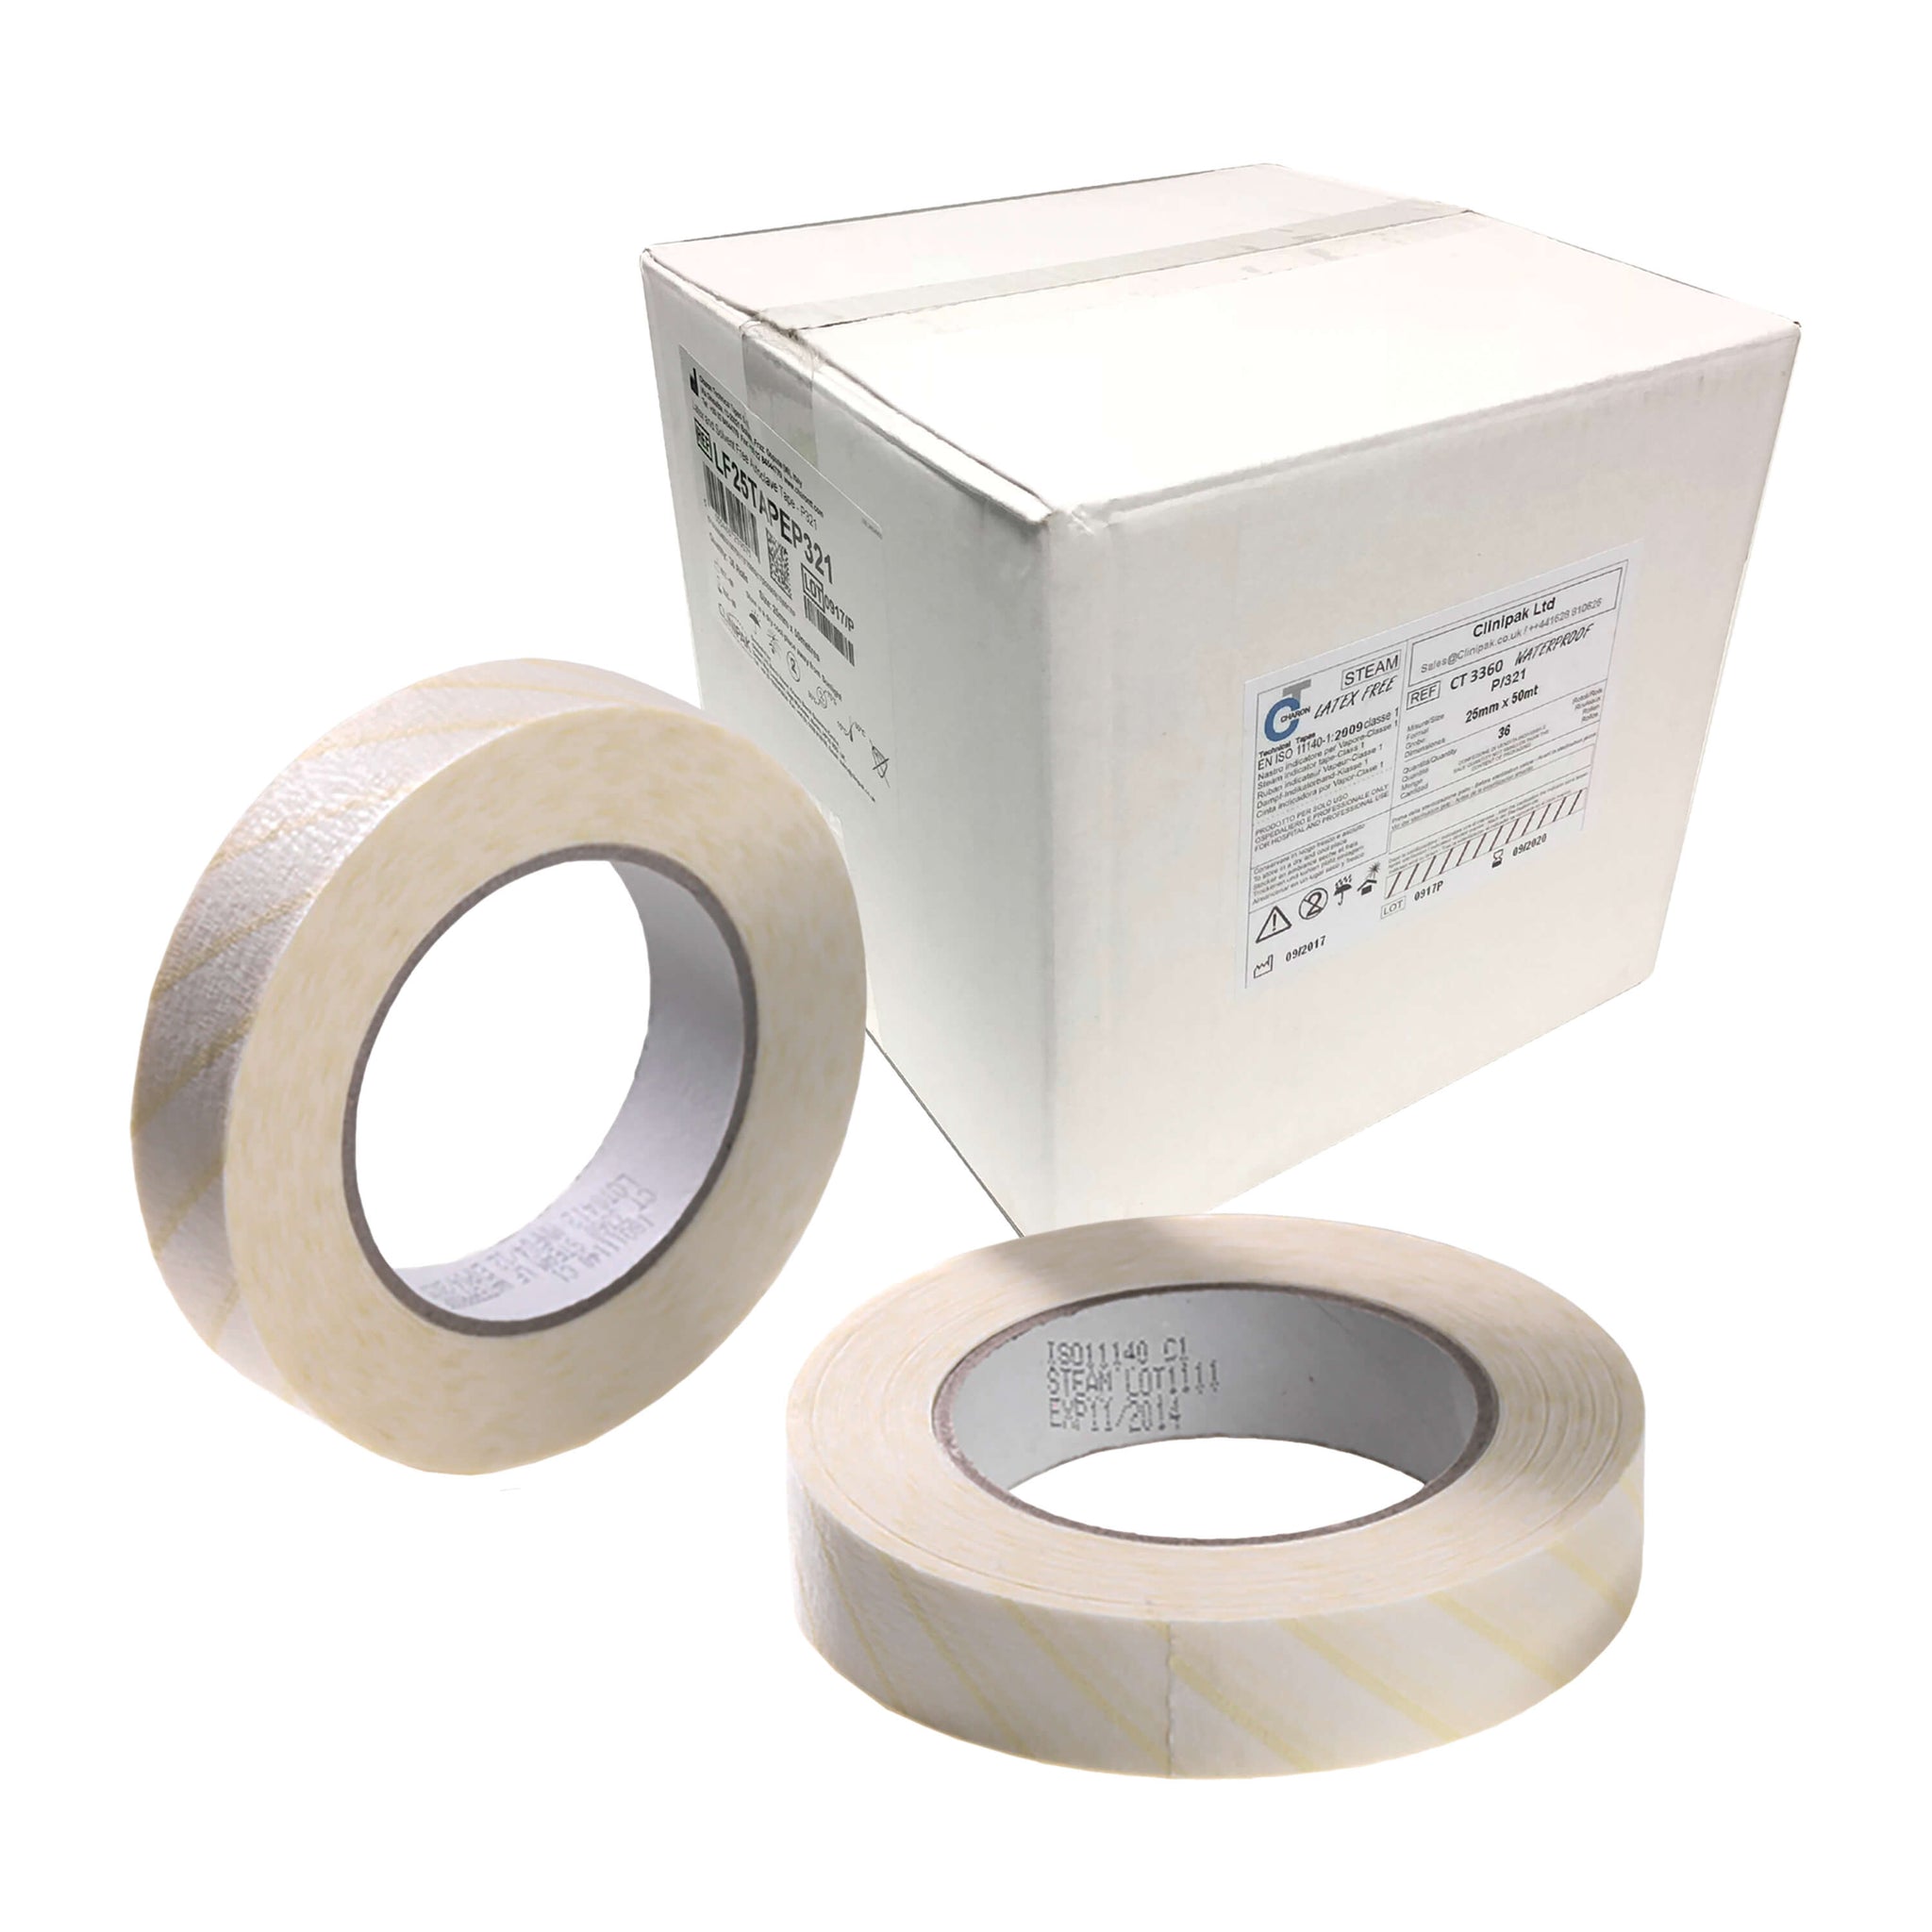 Autoclave Tape with Indicator- 36 Pack, 25 mm